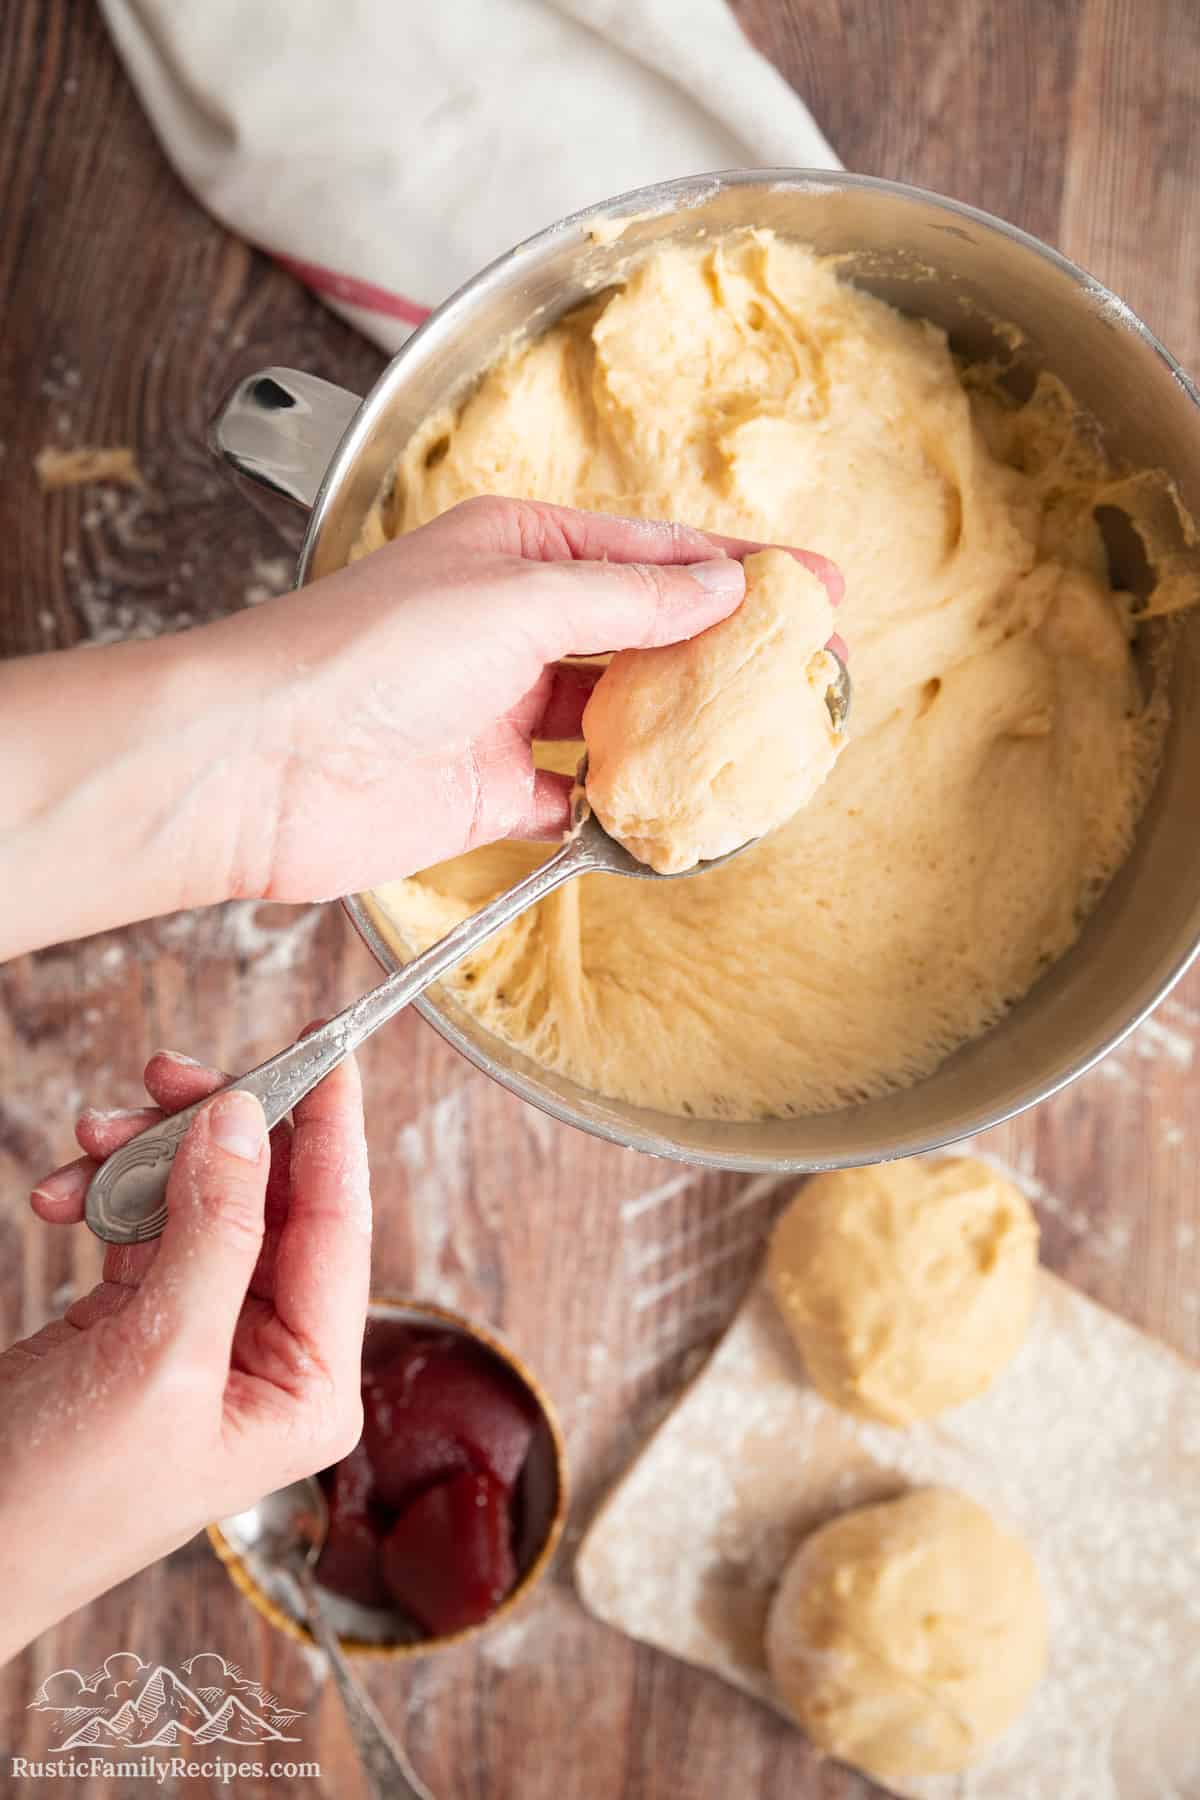 A hand shaping a spoonful of paczki dough